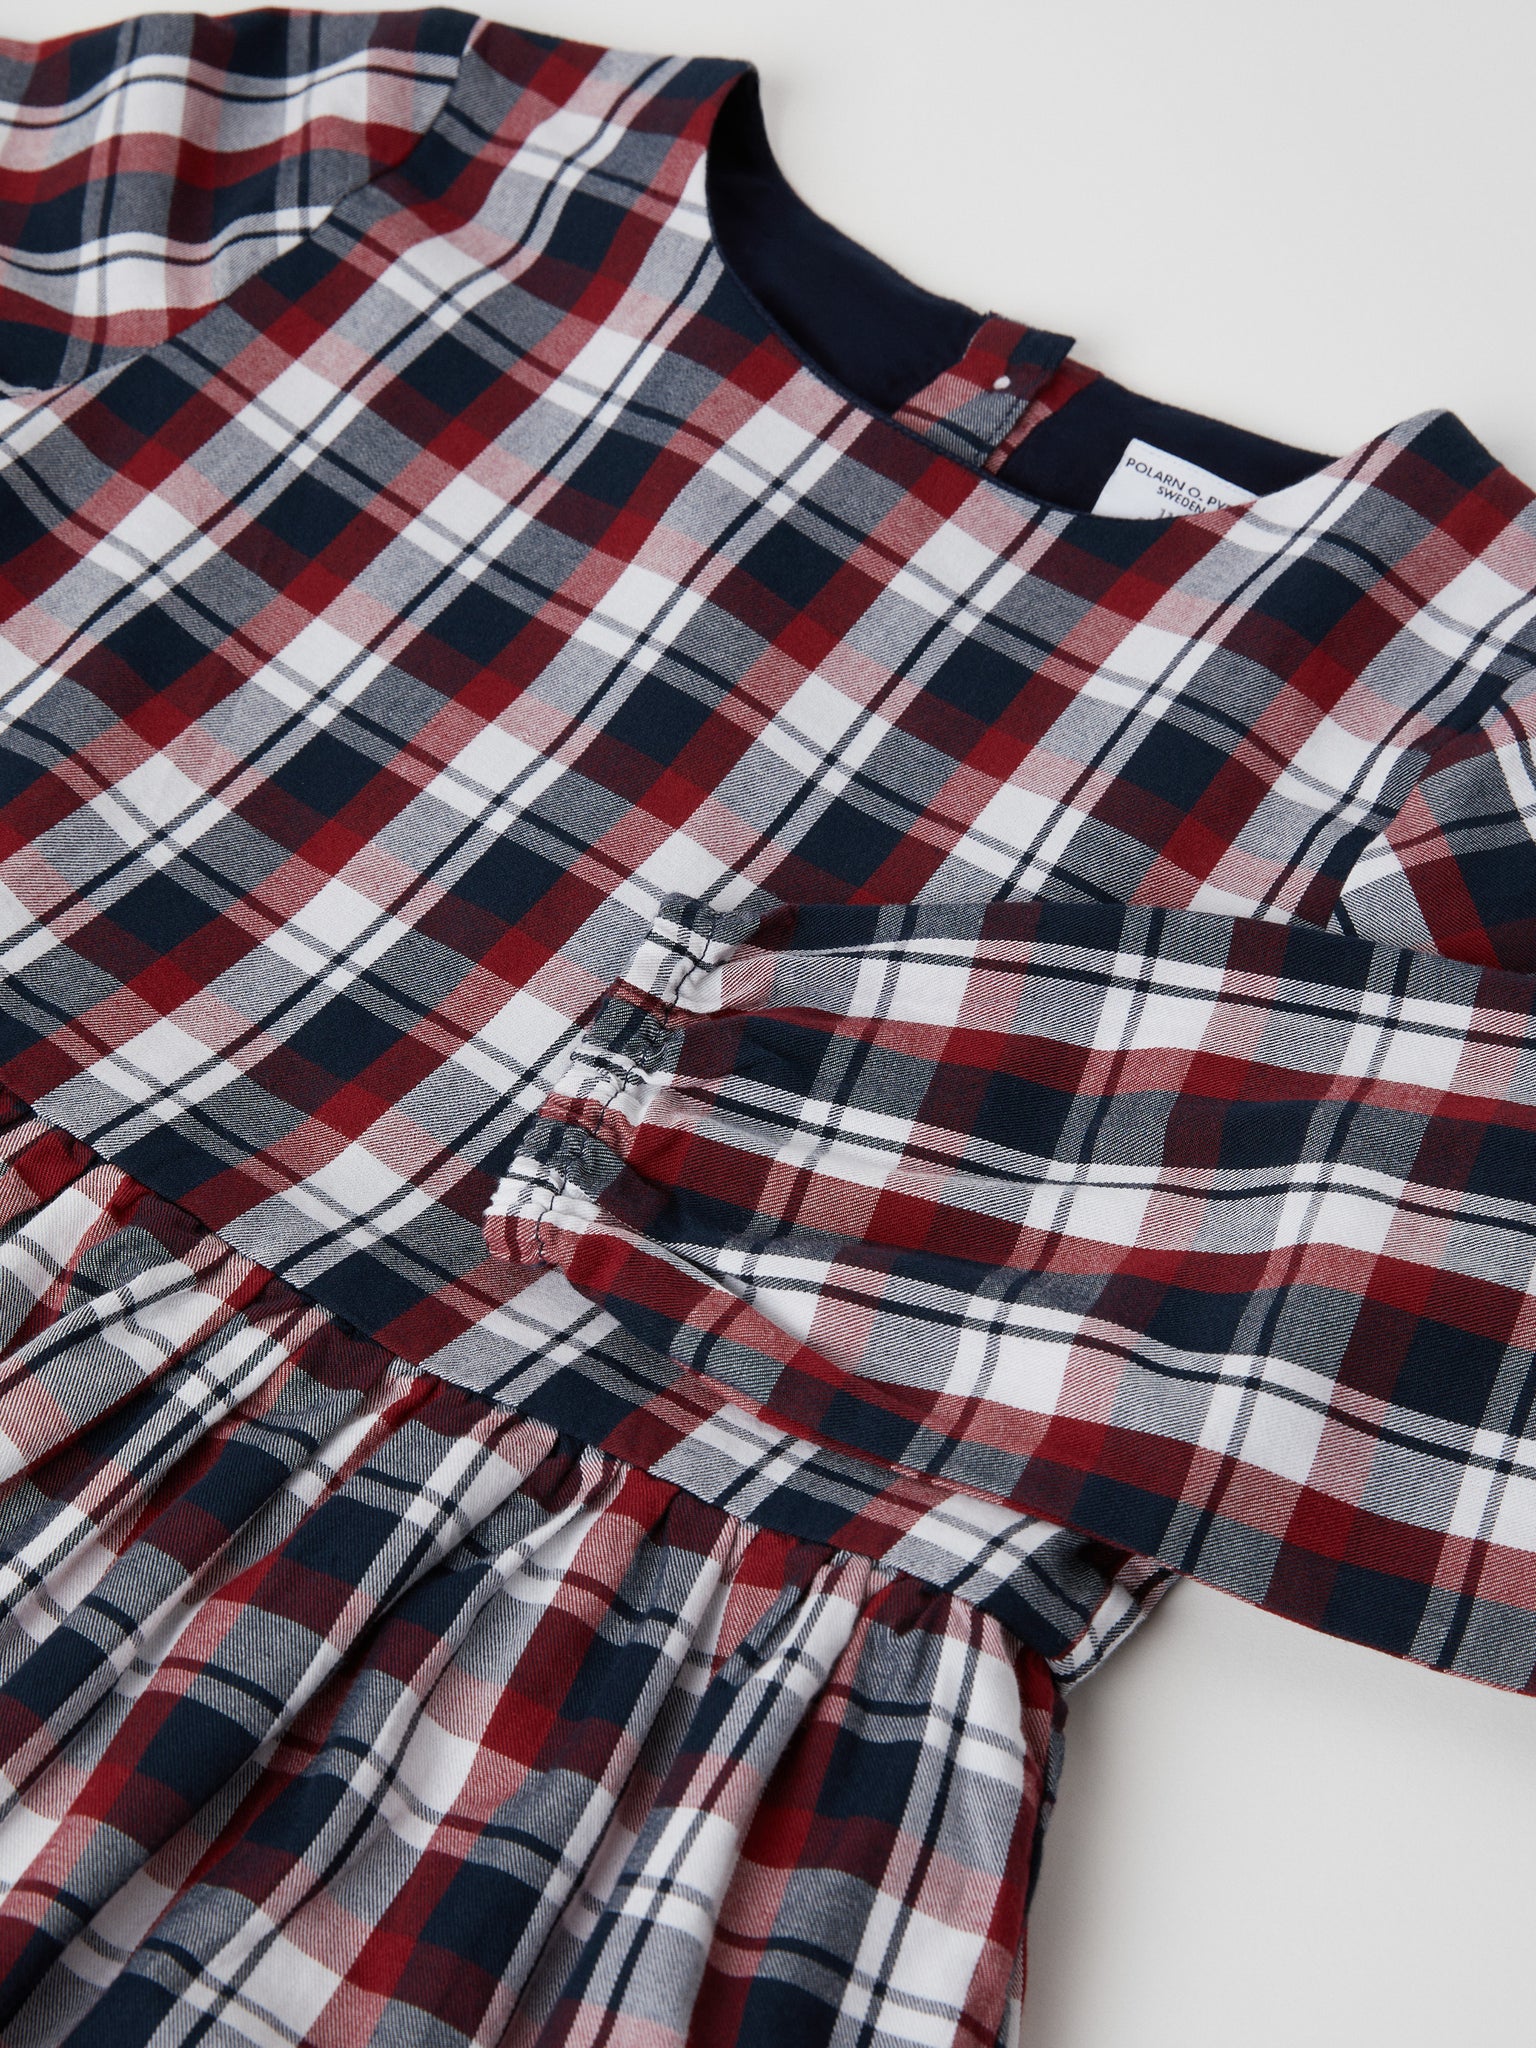 Checked Organic Cotton Kids Dress from the Polarn O. Pyret kidswear collection. Ethically produced kids clothing.